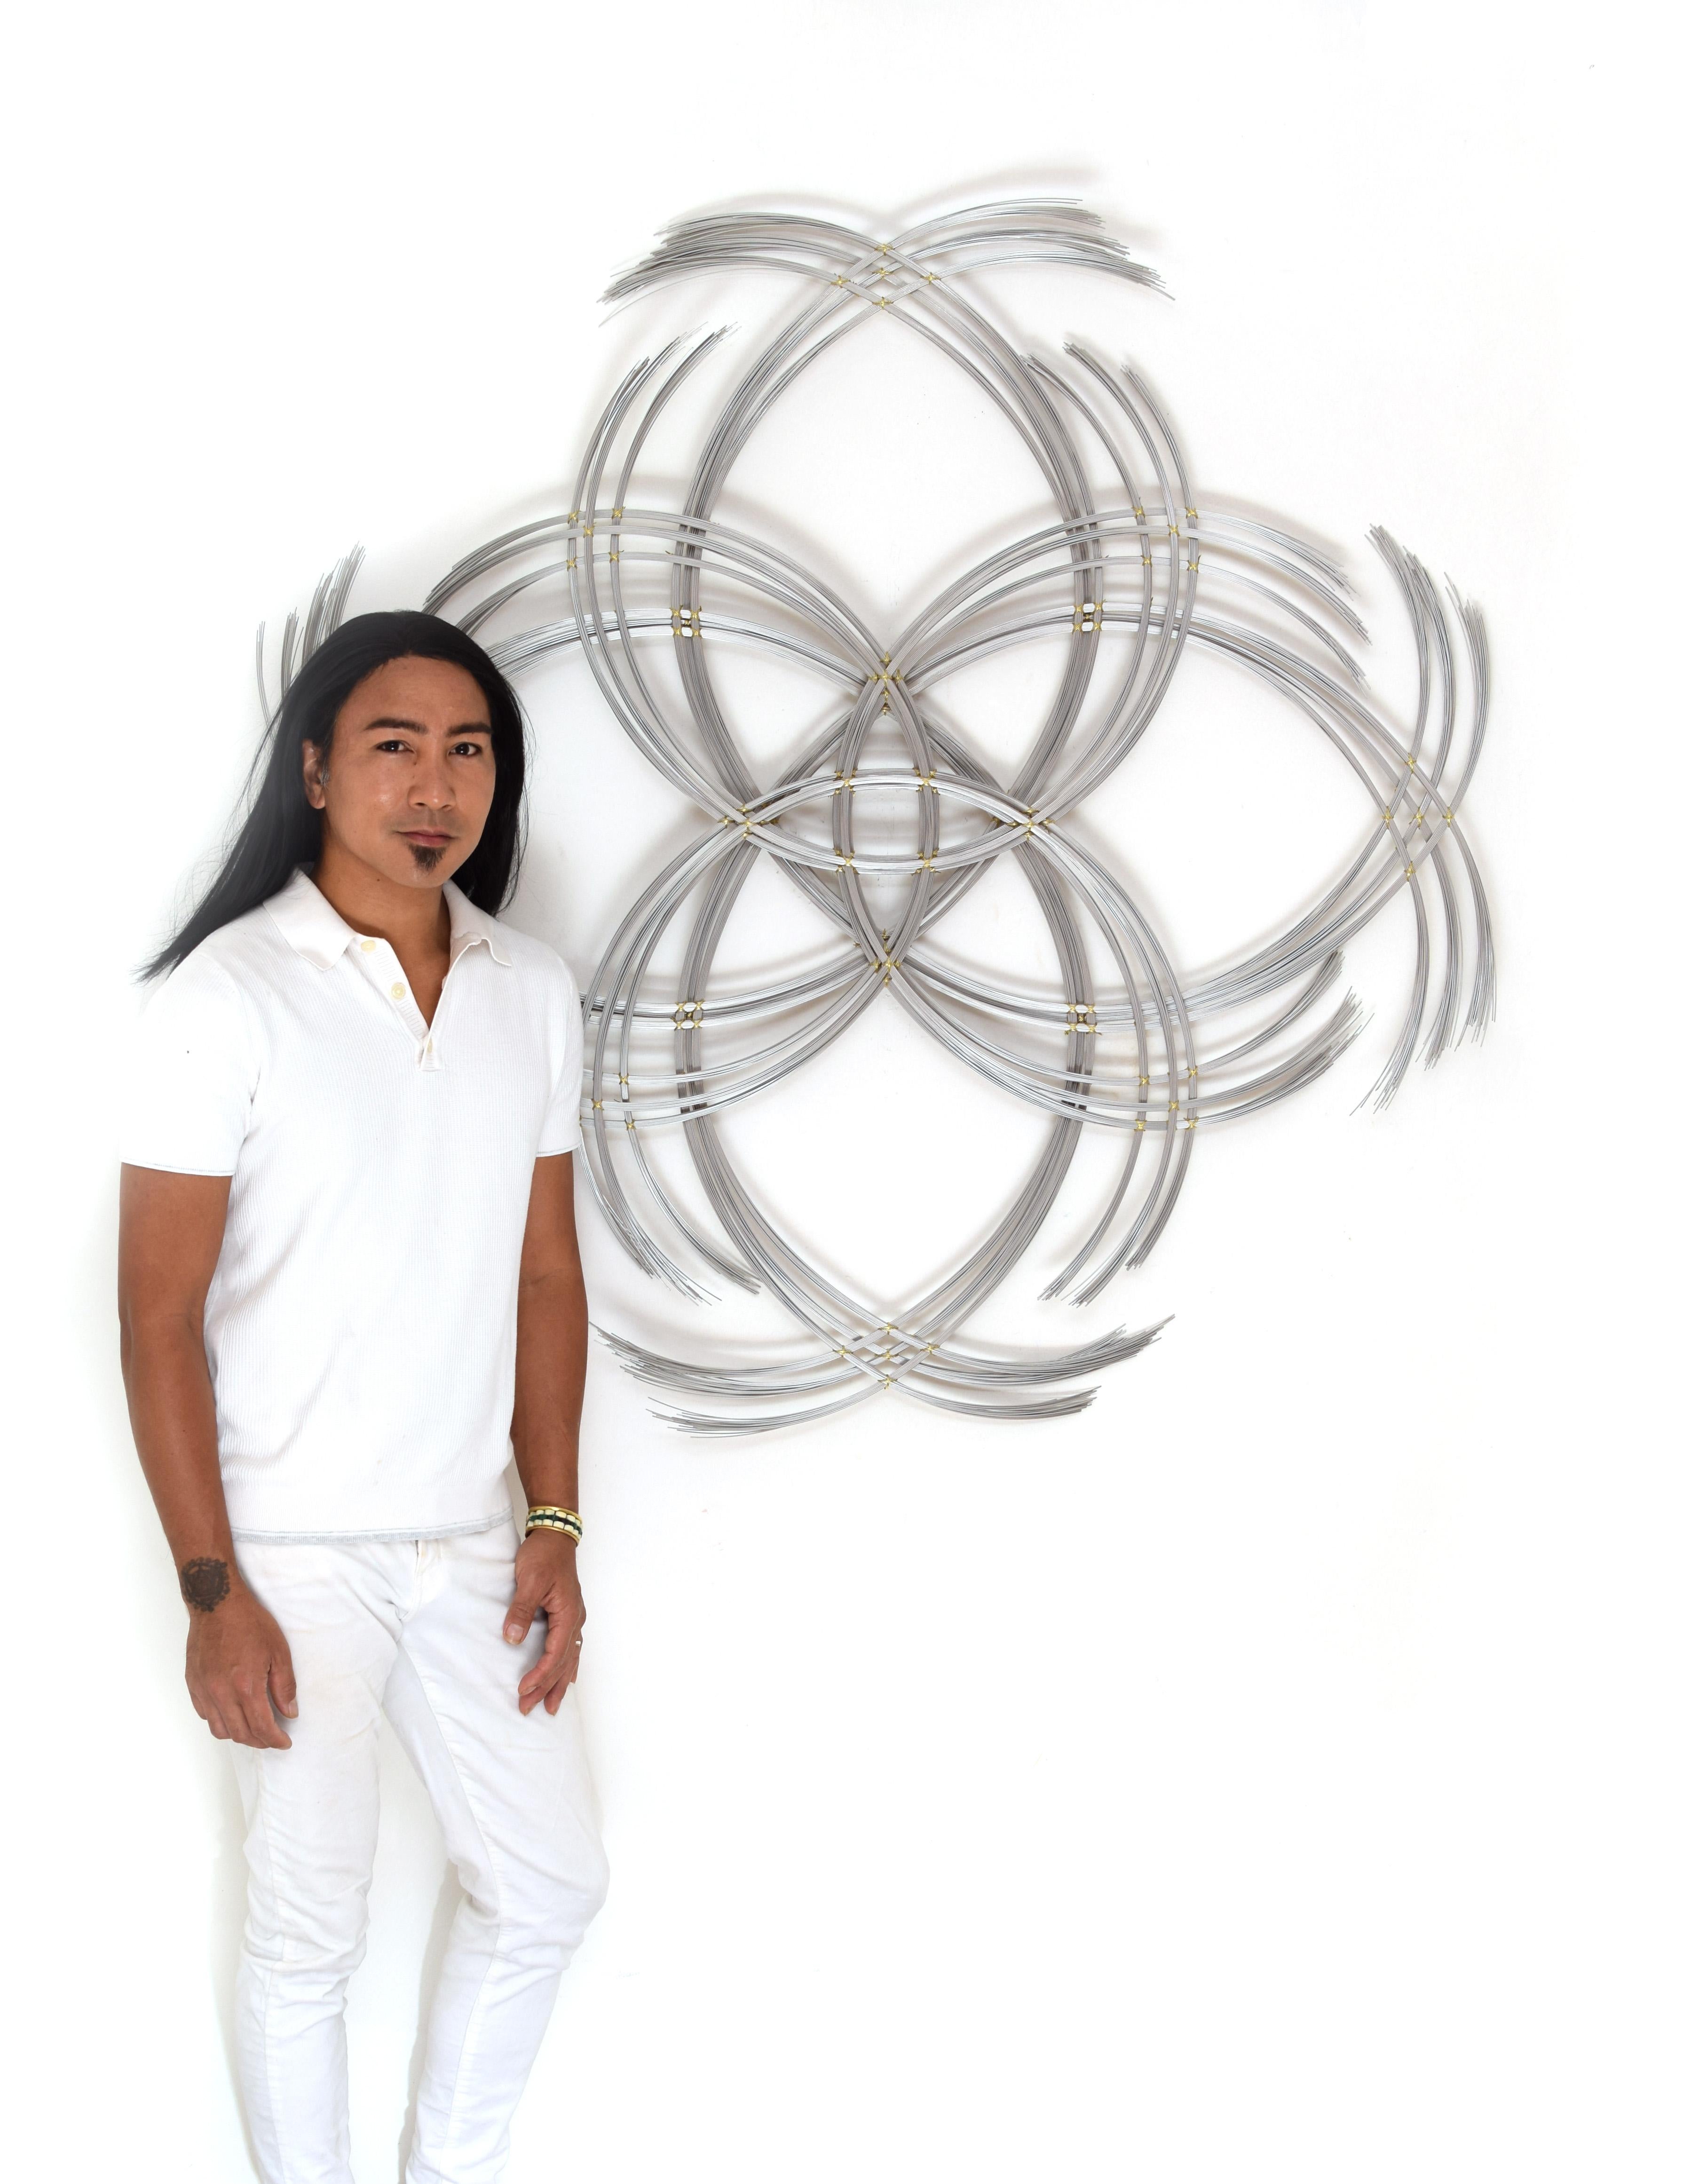 Matte finish stainless steel. 

This abstract wall art by Kue King is created using matte-finish stainless steel wire. Kue uses an aesthetic reminiscent of trees, electricity, and light to create sculptures of peace and beauty. Adults and children